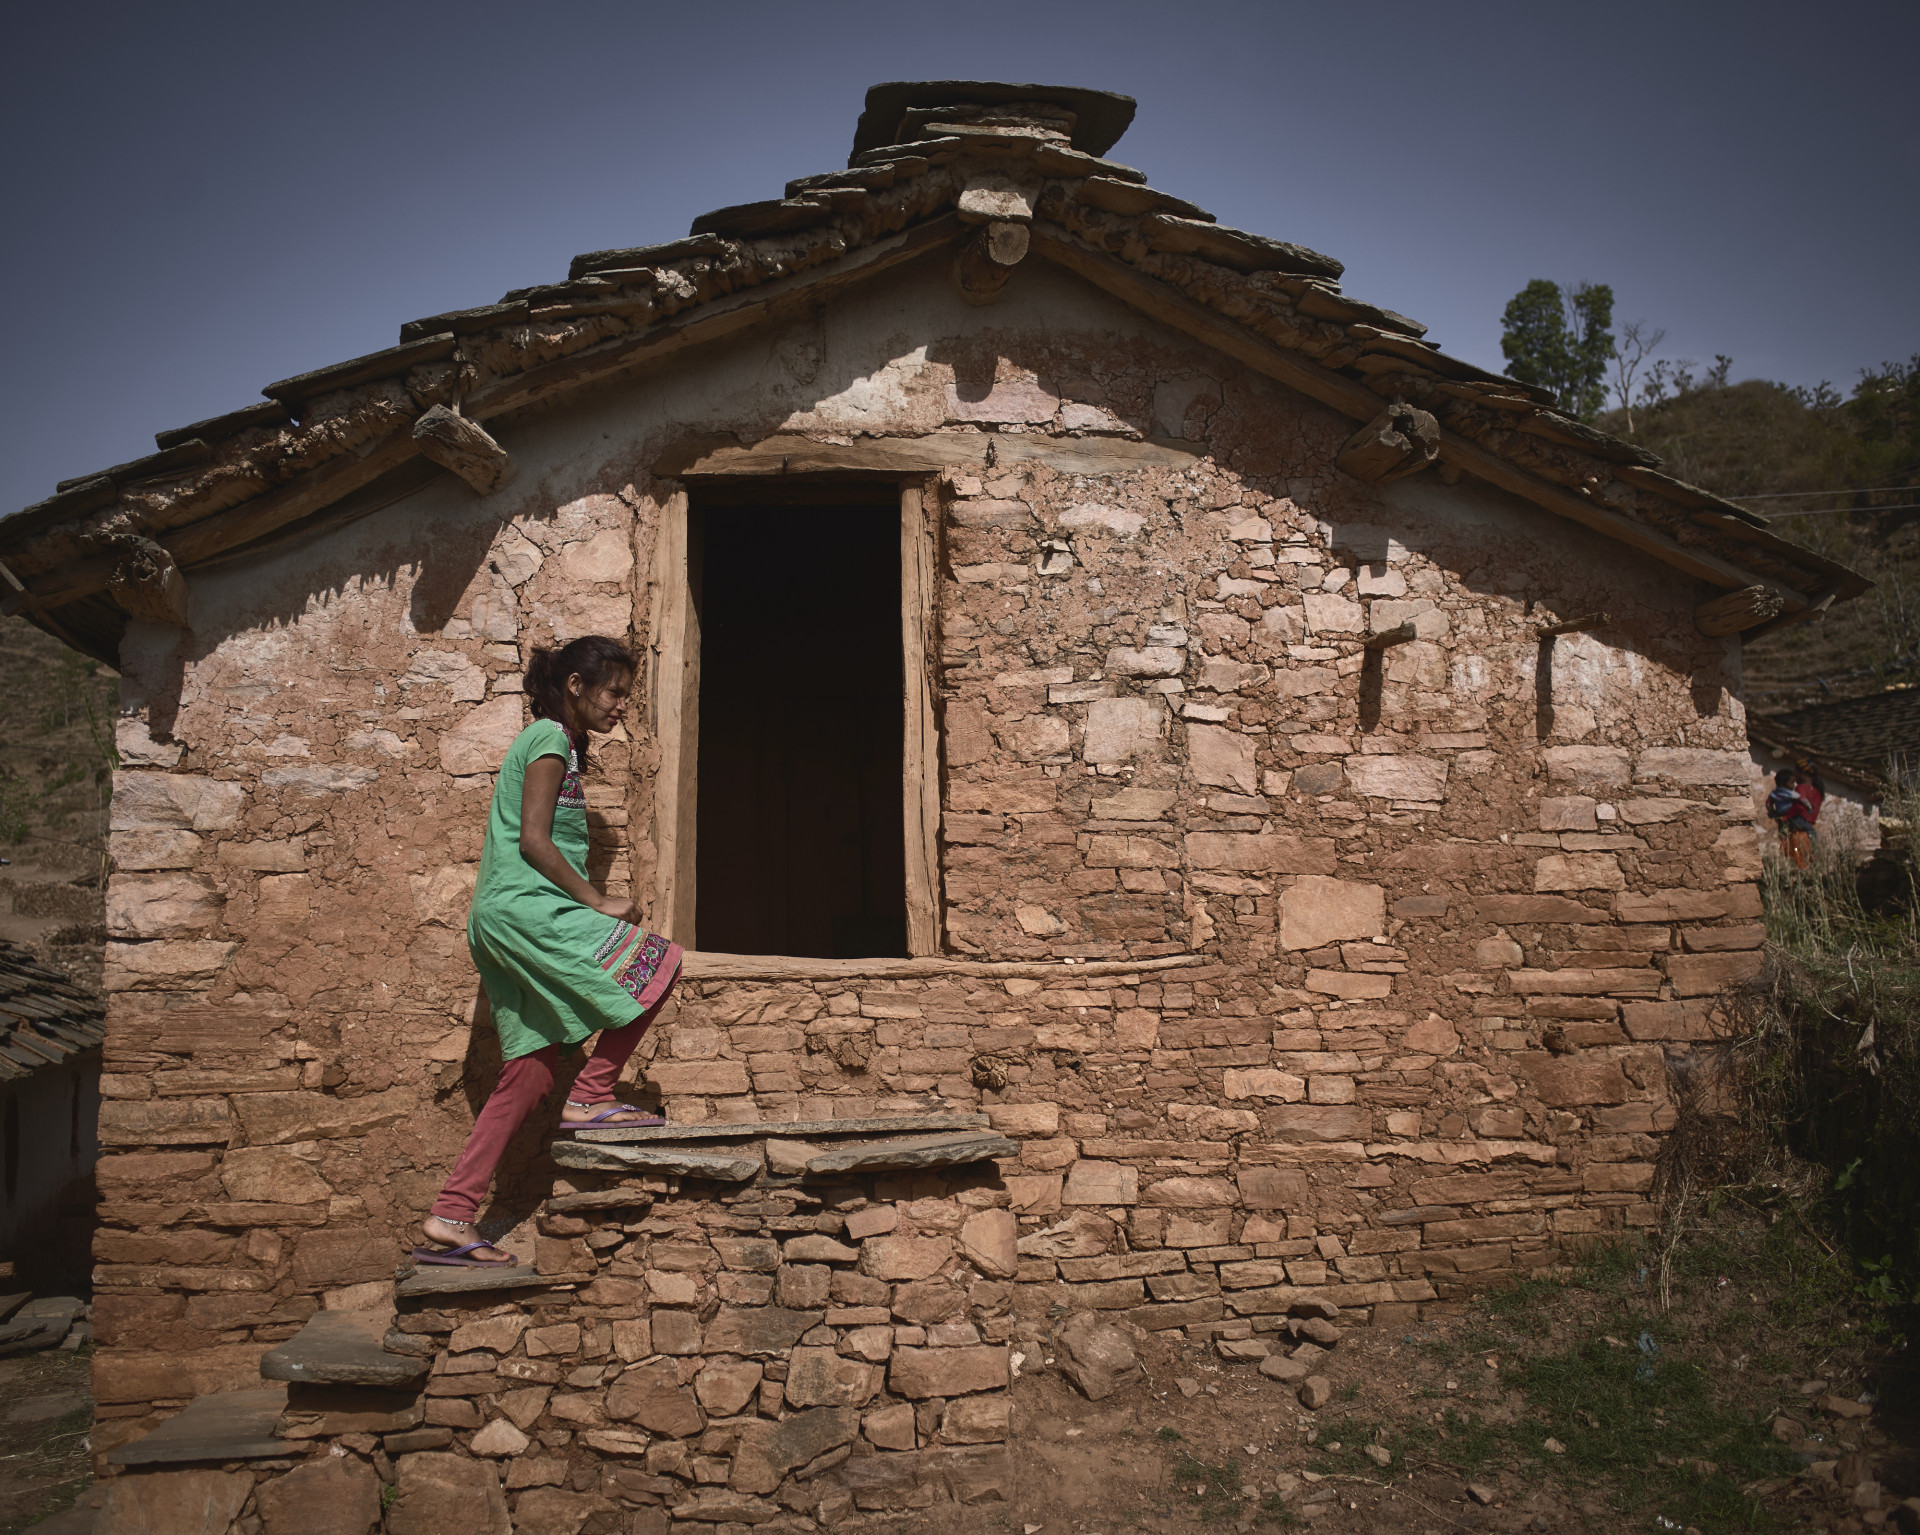 Chaupadi. Nepal. 2018. Ishu Parki, 14, lives in the village of in the Pakri, Doti District, Nepal.  She practices chaupadi every month. IshuÕs mother says that she does not agree with the practice and only enforces it as a result of social pressure. Photo Credit: ActionAid gender discrimination